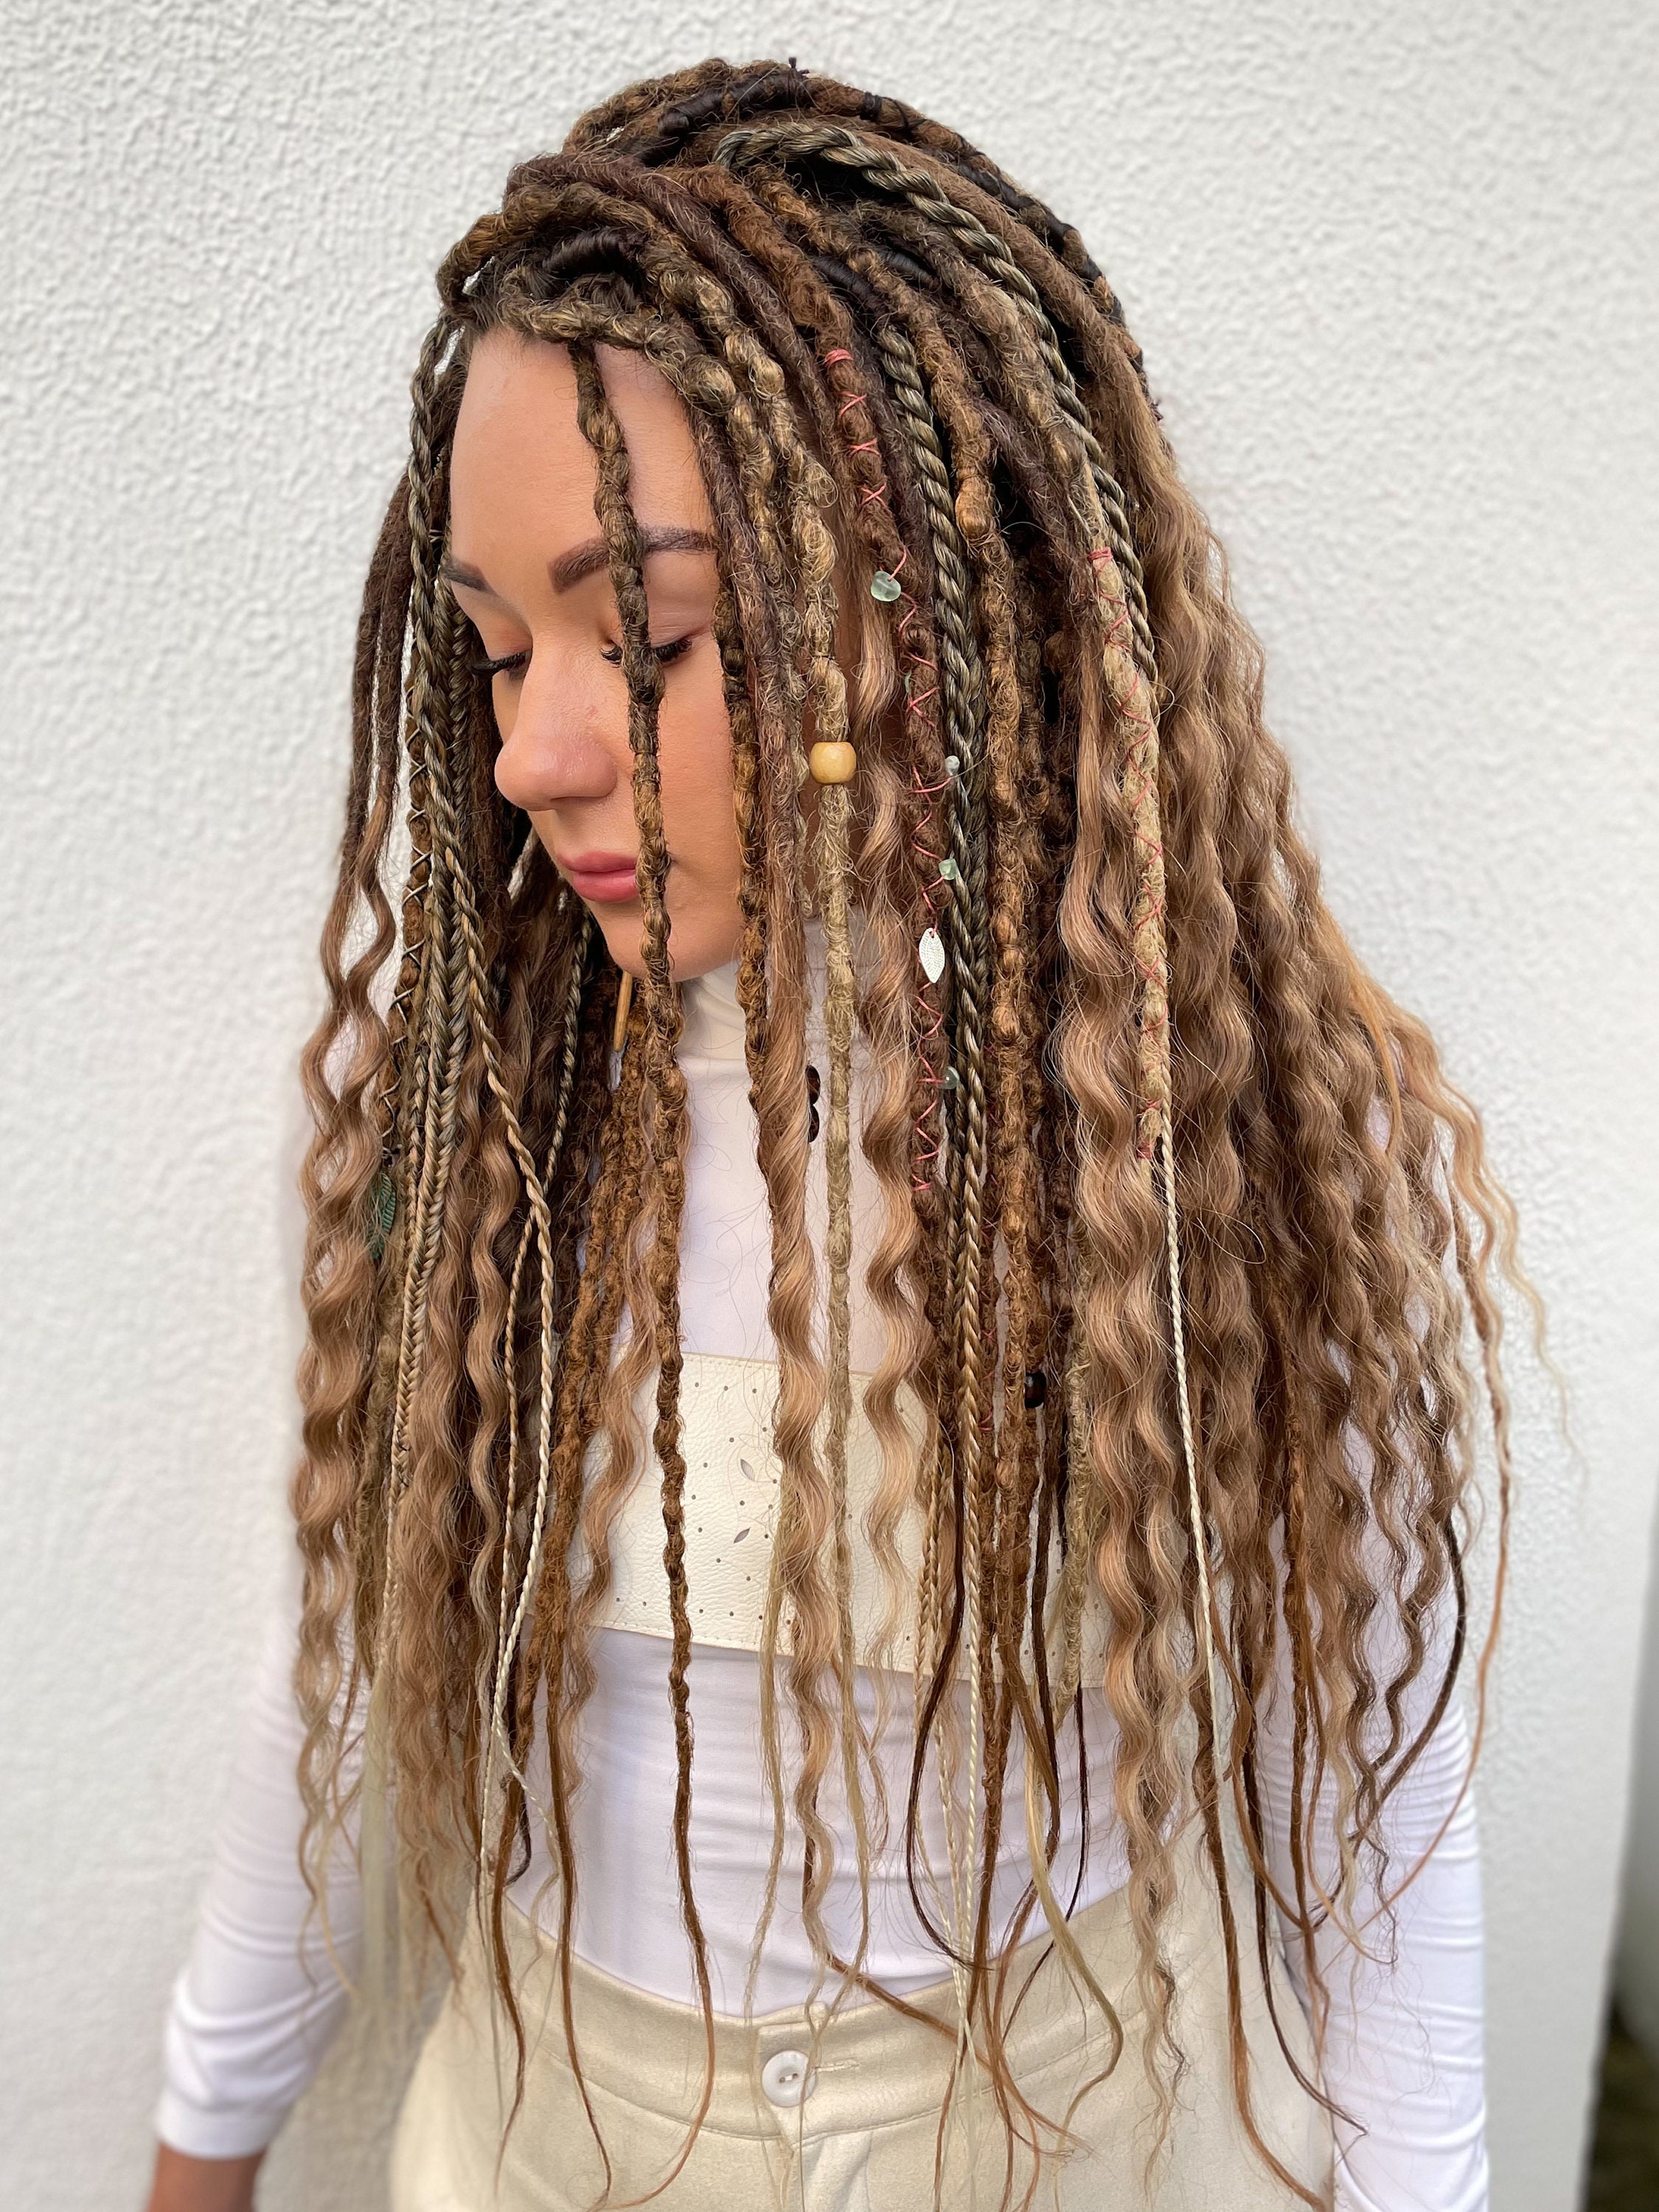 Synthetic Dreads, Bohemian Set Dready Waves, Natural Reddish Blonde,  Copper, Light Brown Dreadlocks With Accessories, Pendants, Boho Style 